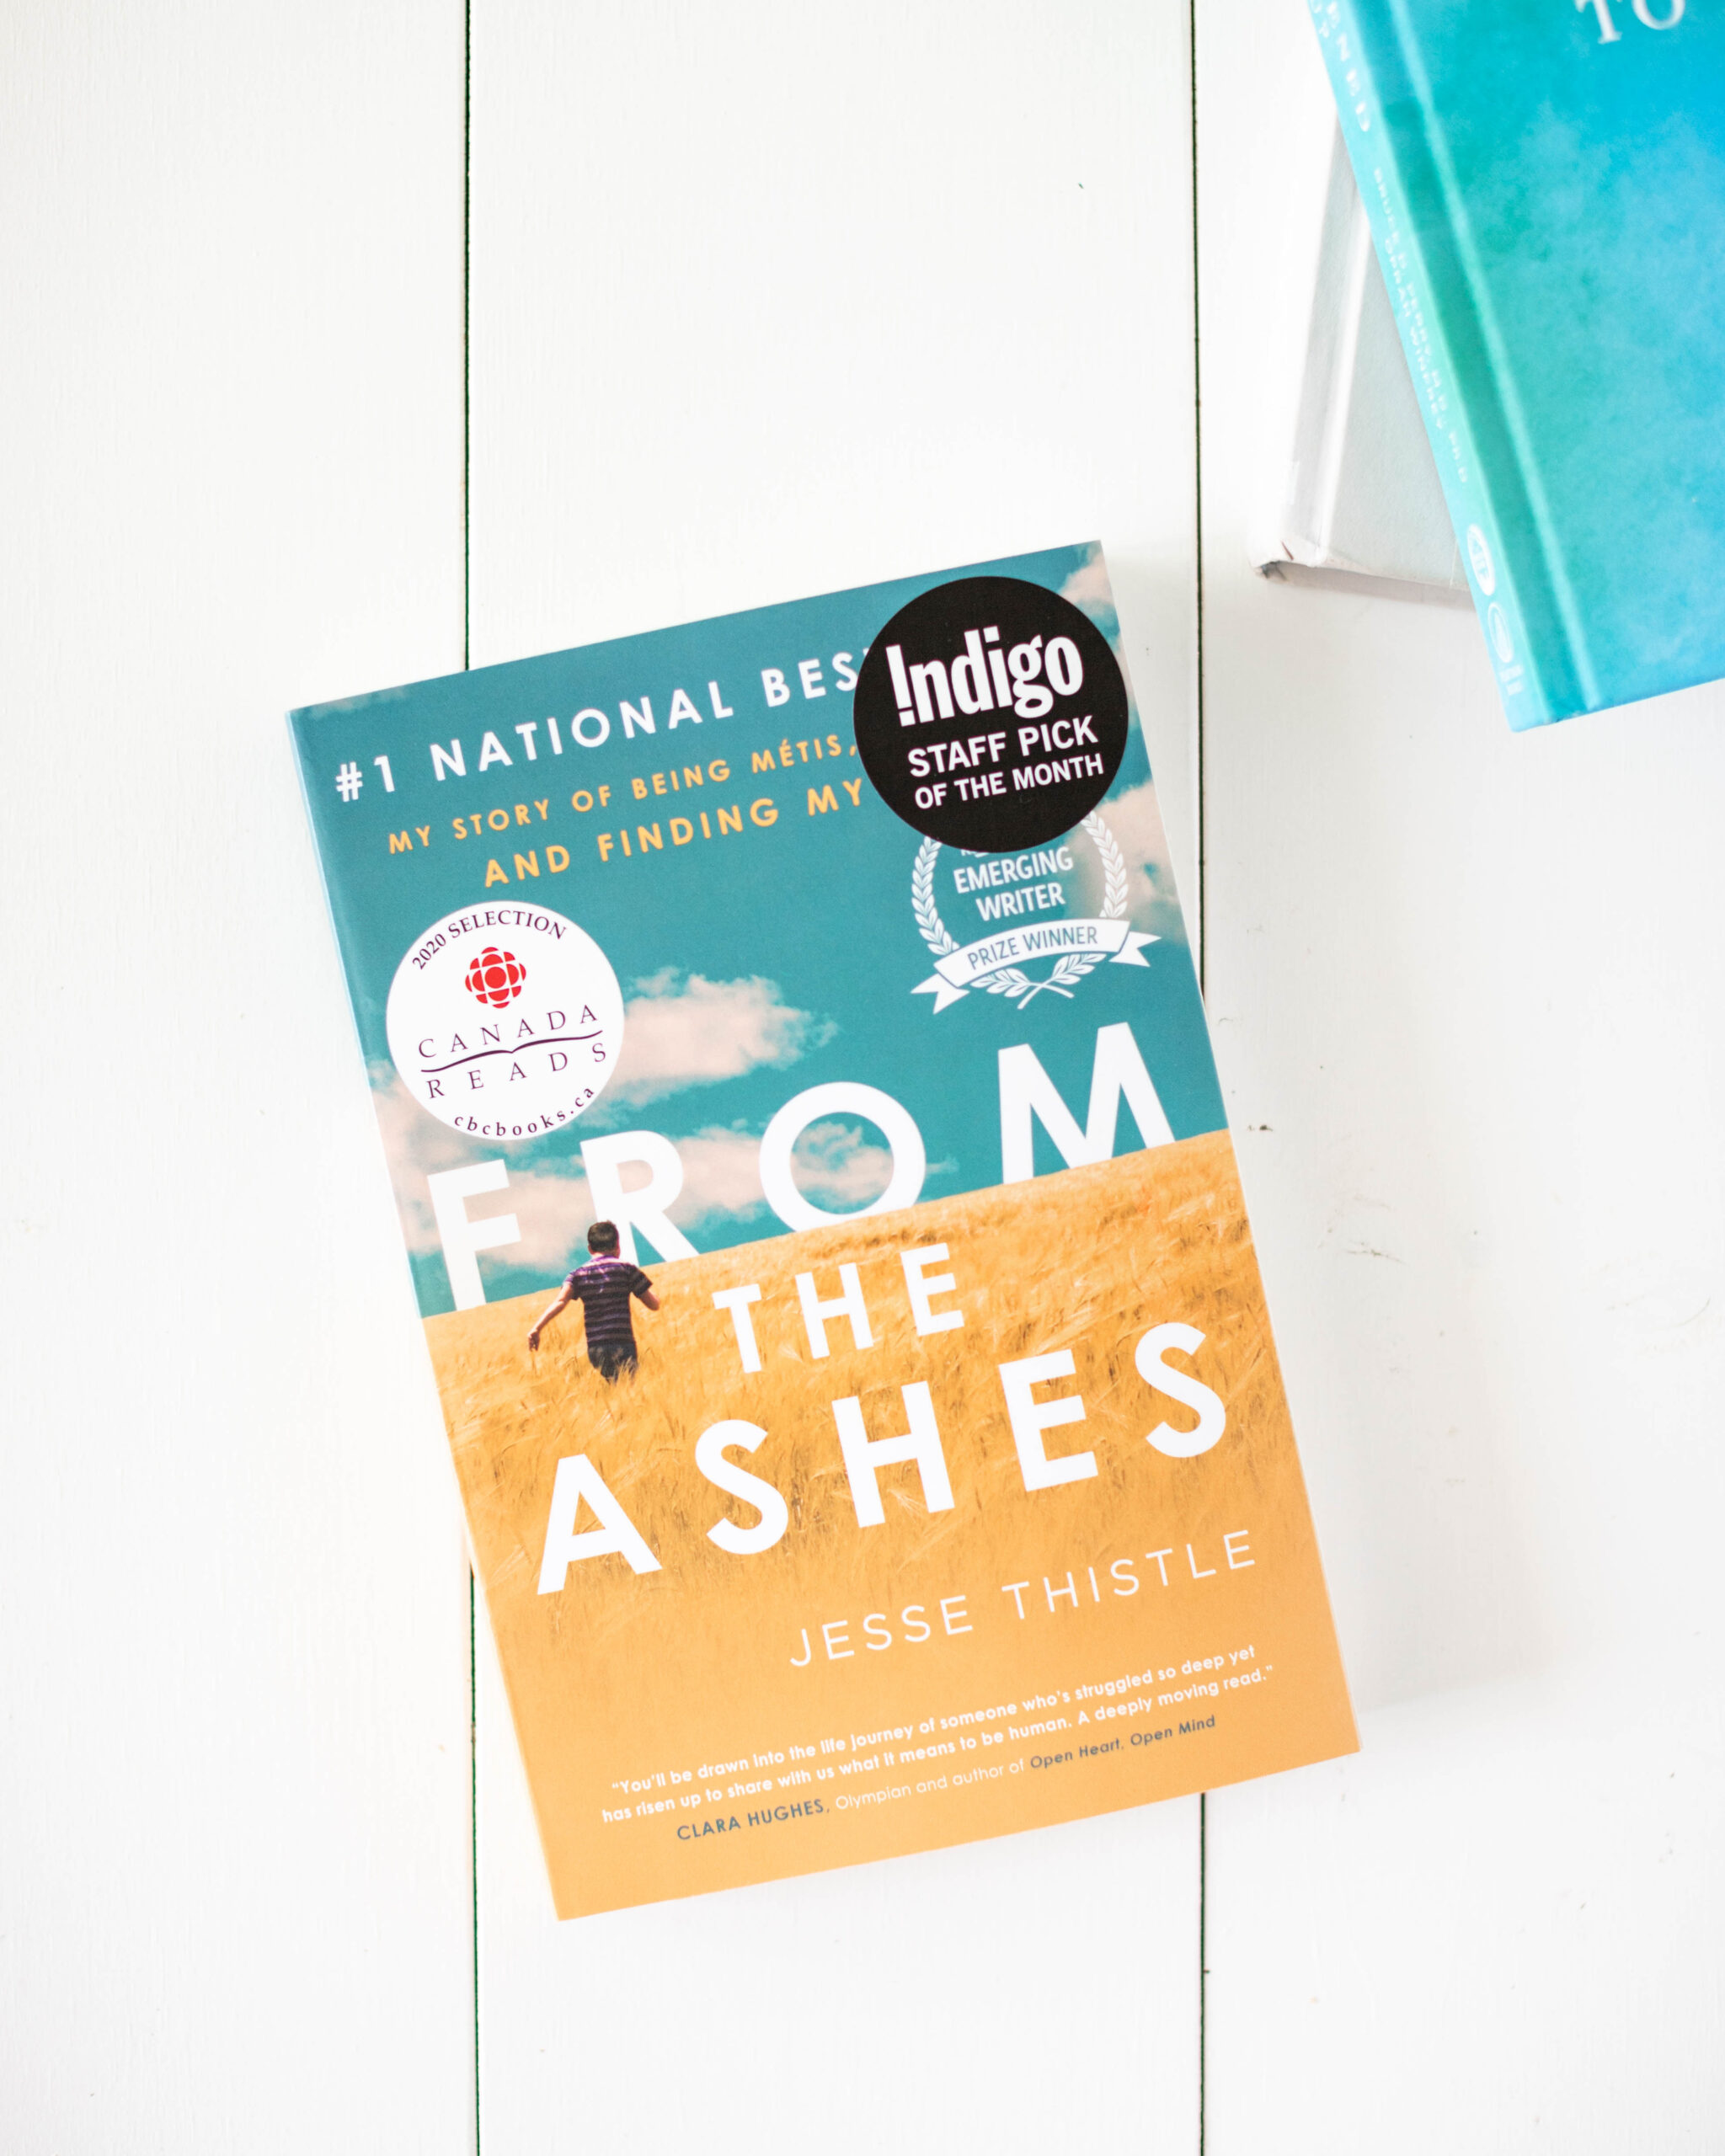 Our Fall Reading List, From the Ashes